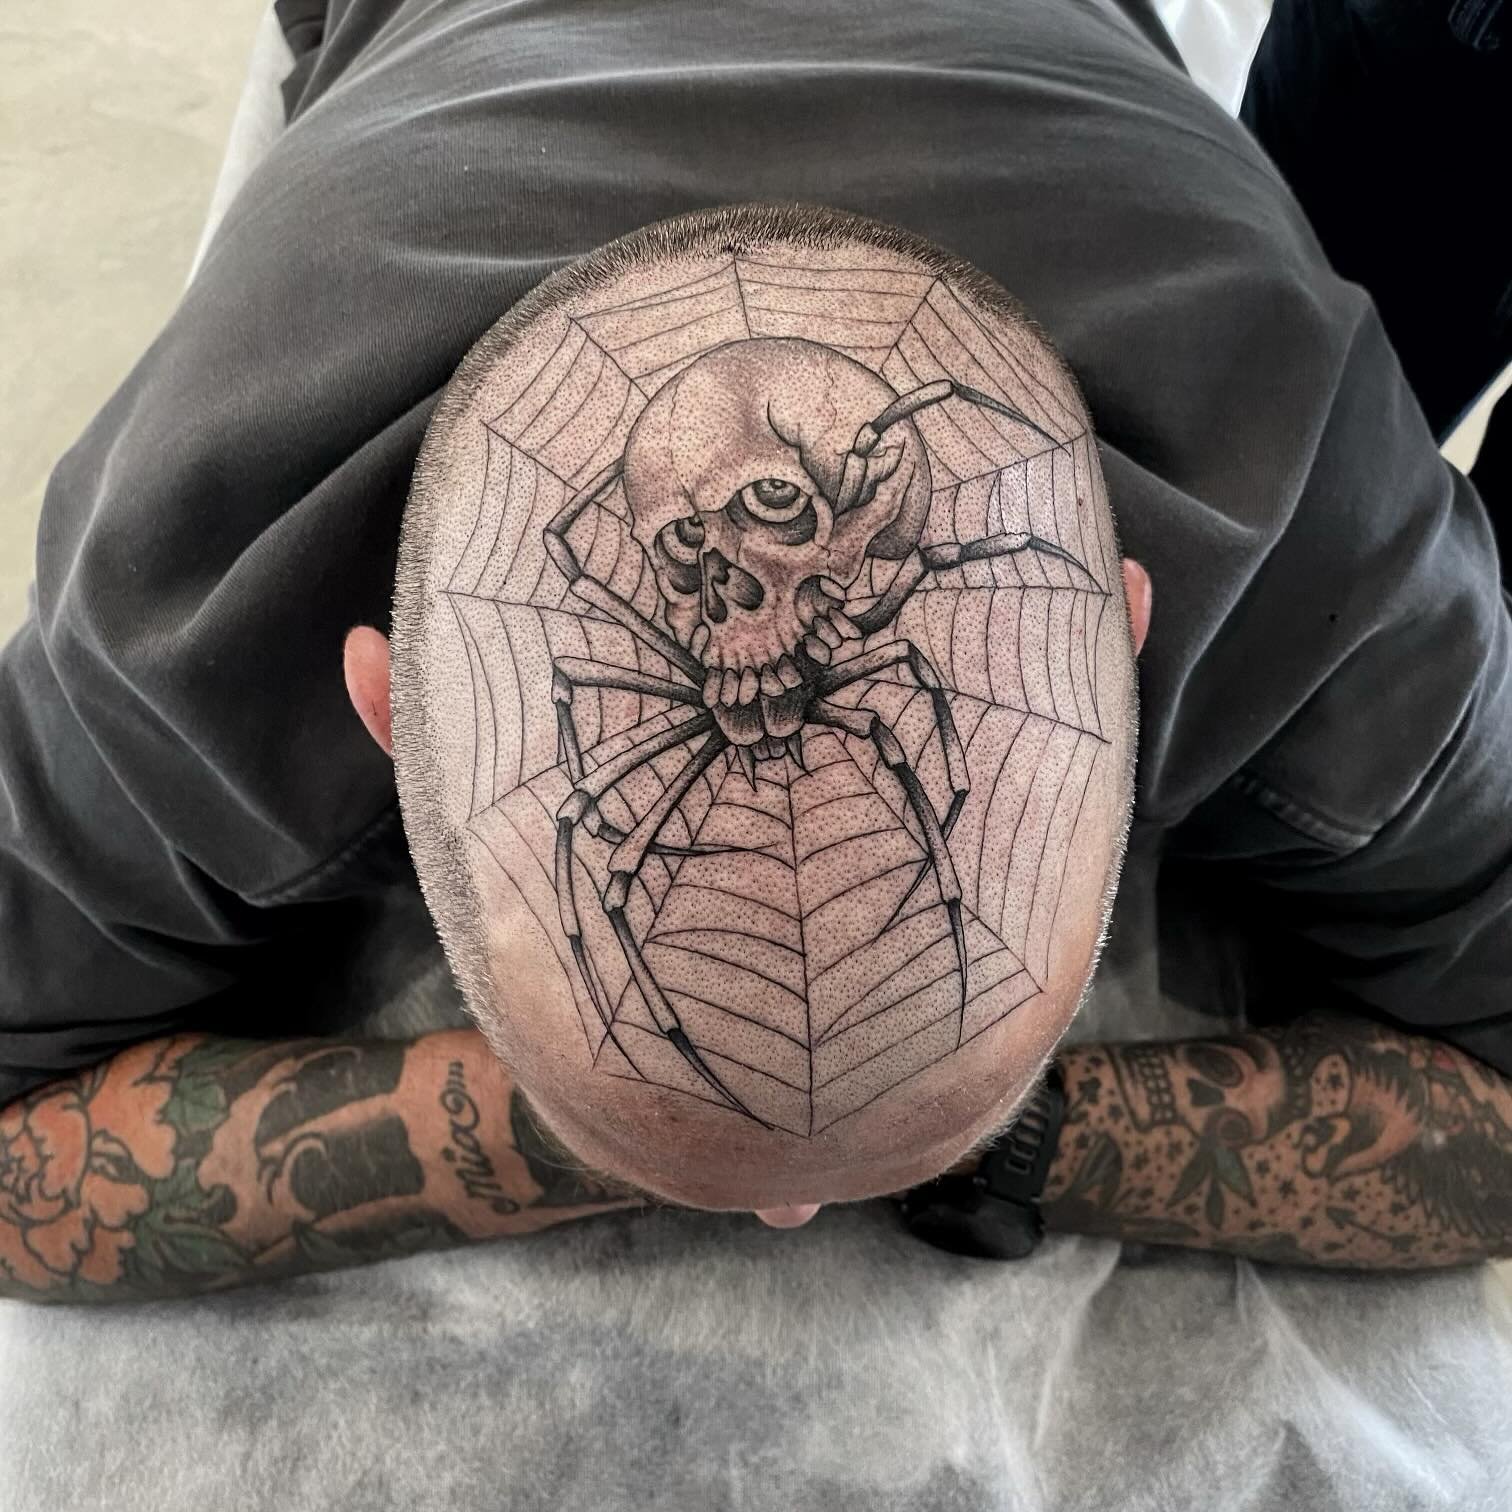 Spider skull ☠️ 🕸️ by @karlwillmann 
Karl is with us on Fridays and Saturdays! DM him directly, the shop or call 07 5648 0626 to book in 
&bull;
&bull;
&bull;
&bull;
&bull;
#new #fyp #tradtattoo #goldcoast #goldcoasttattoo #visitgoldcoast #tattooide